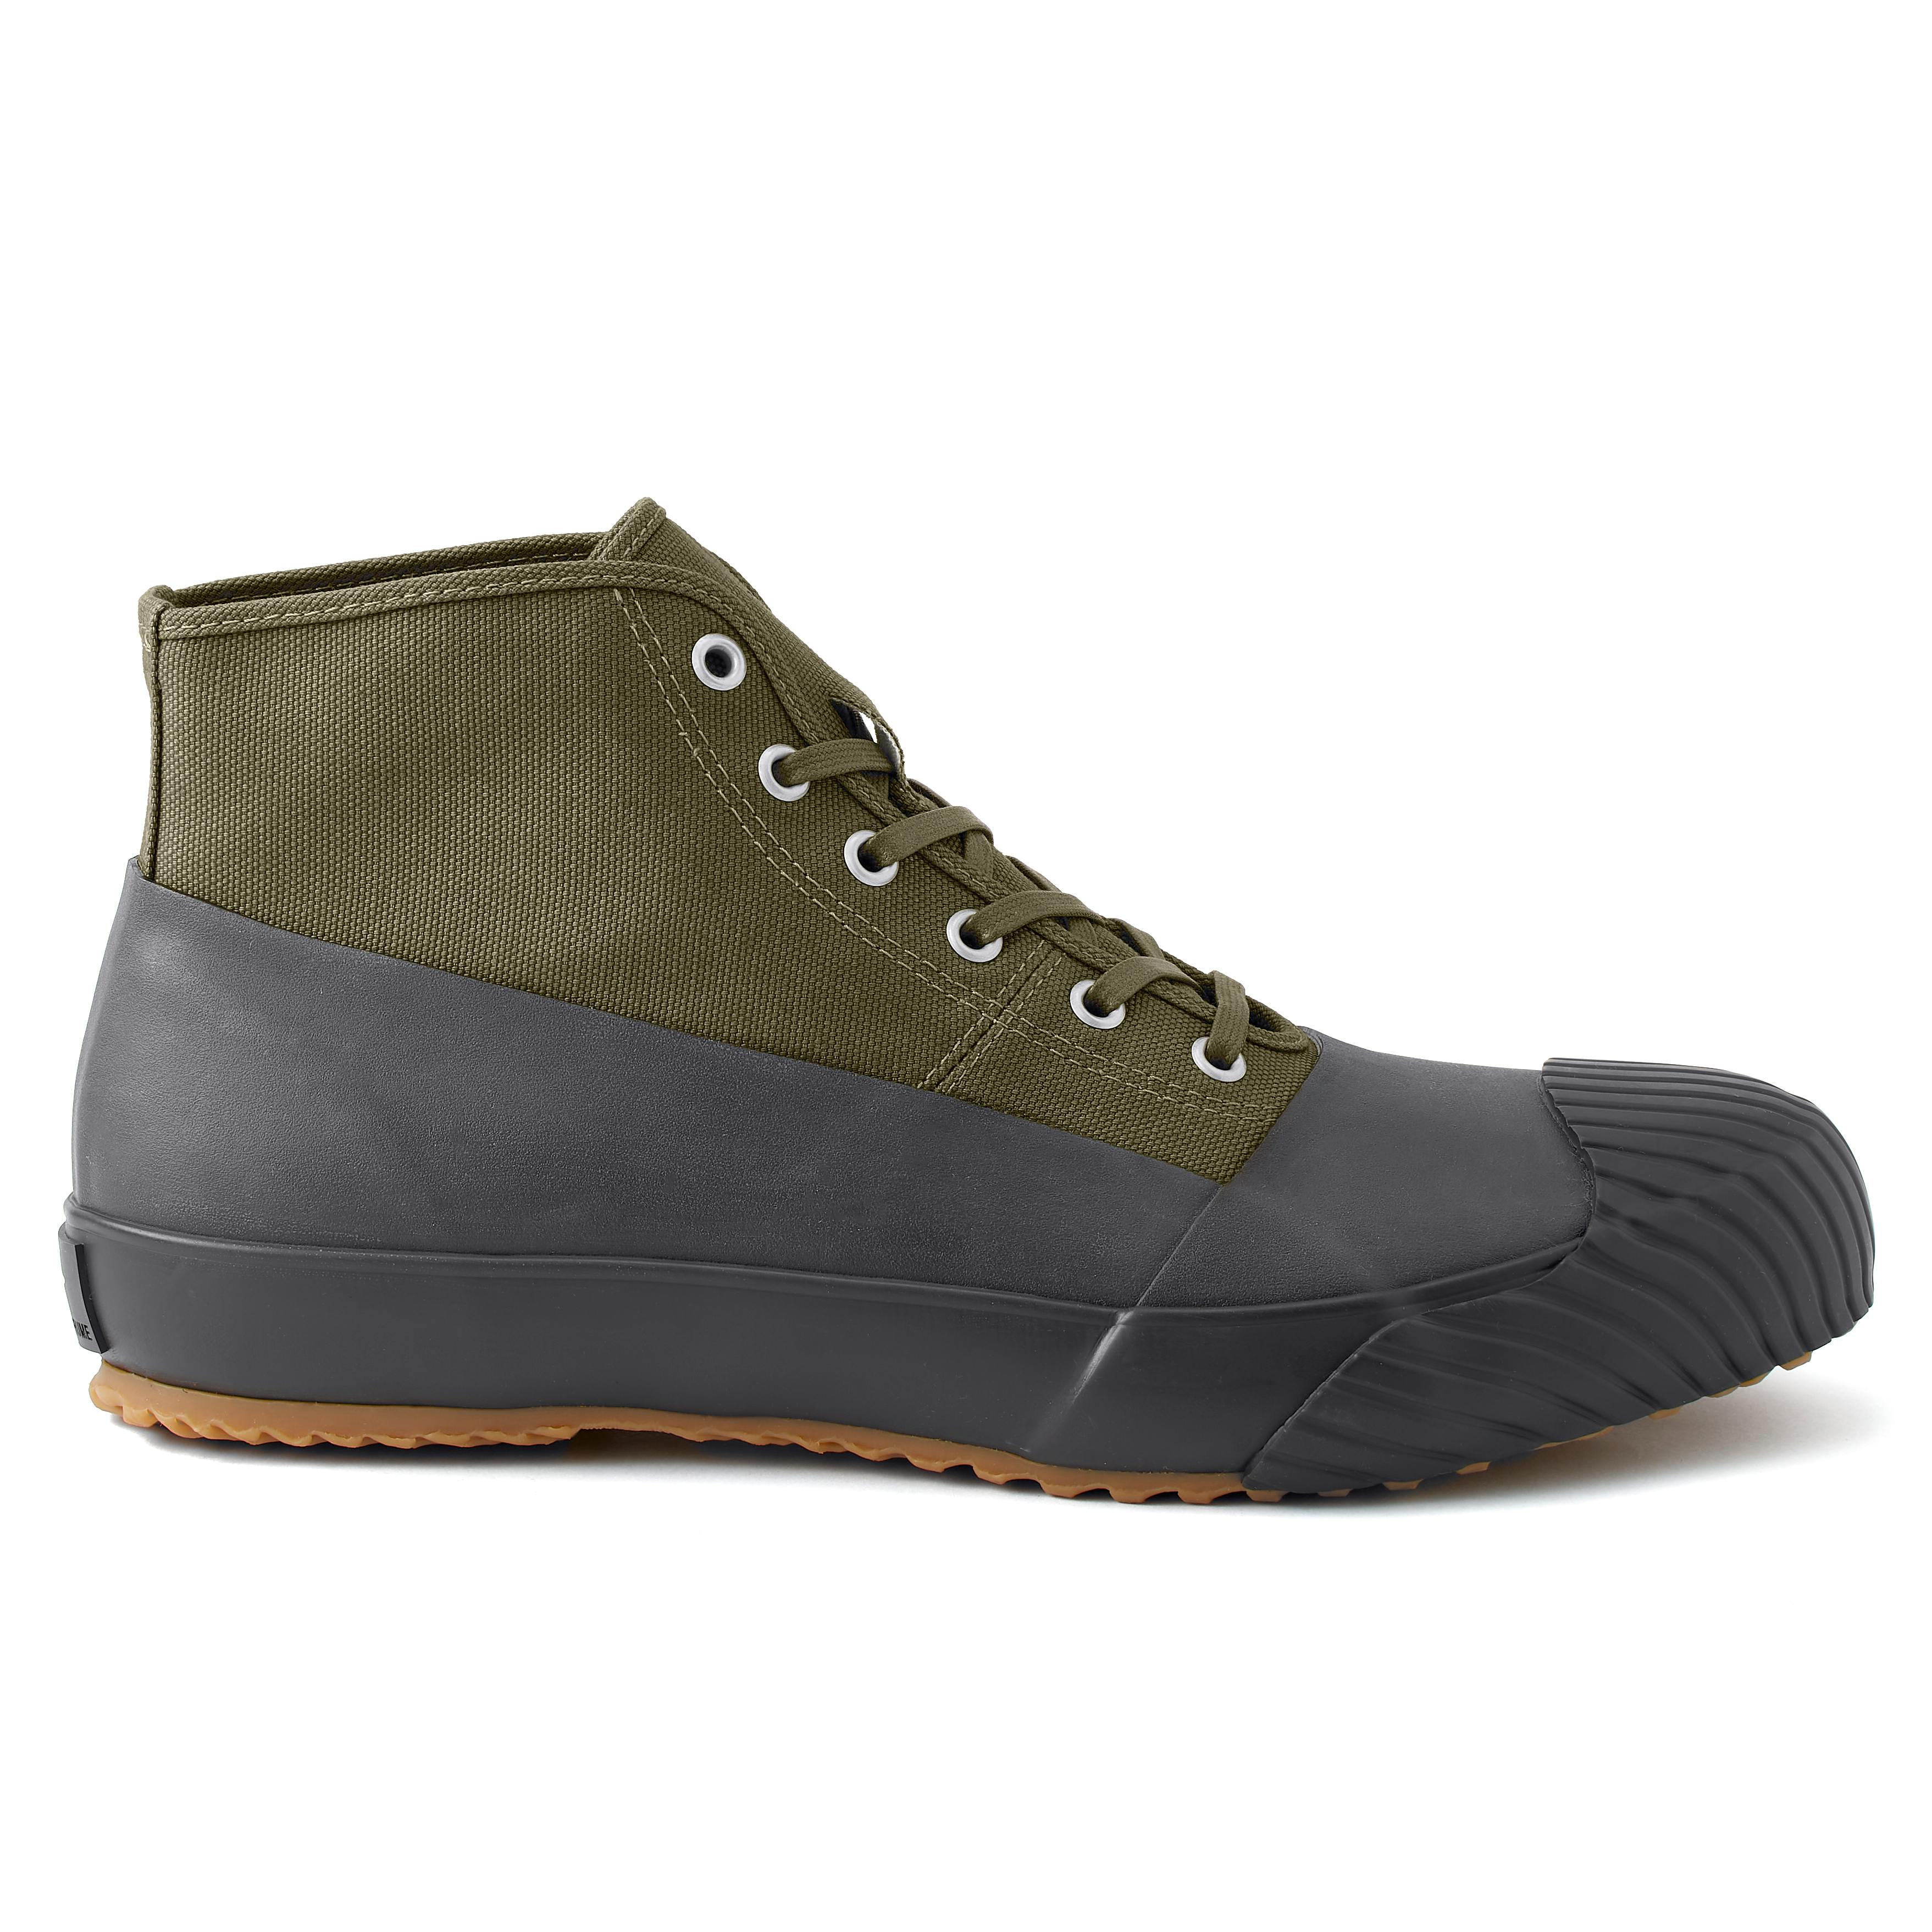 All Weather Sneaker Boot